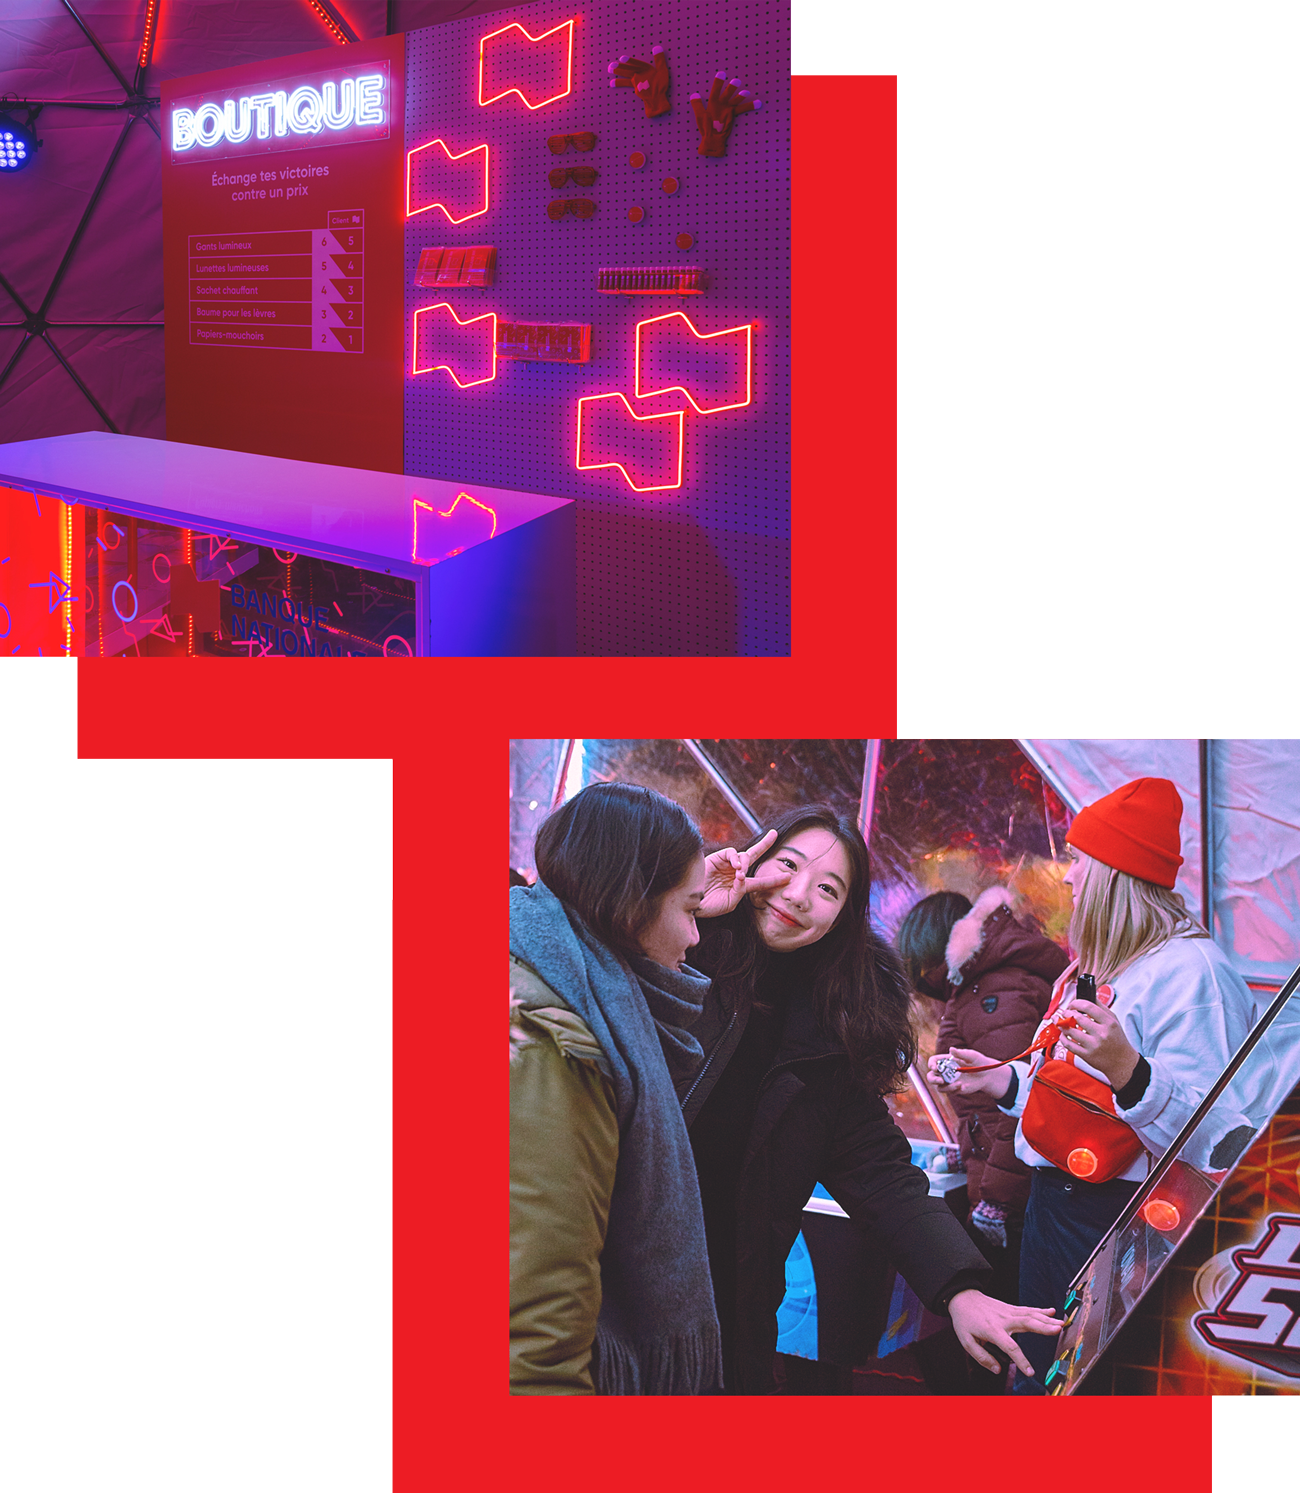 Banque-Nationale_xm_Arcade-BN-Igloofest_by-catherine-bisaillon_mosaic